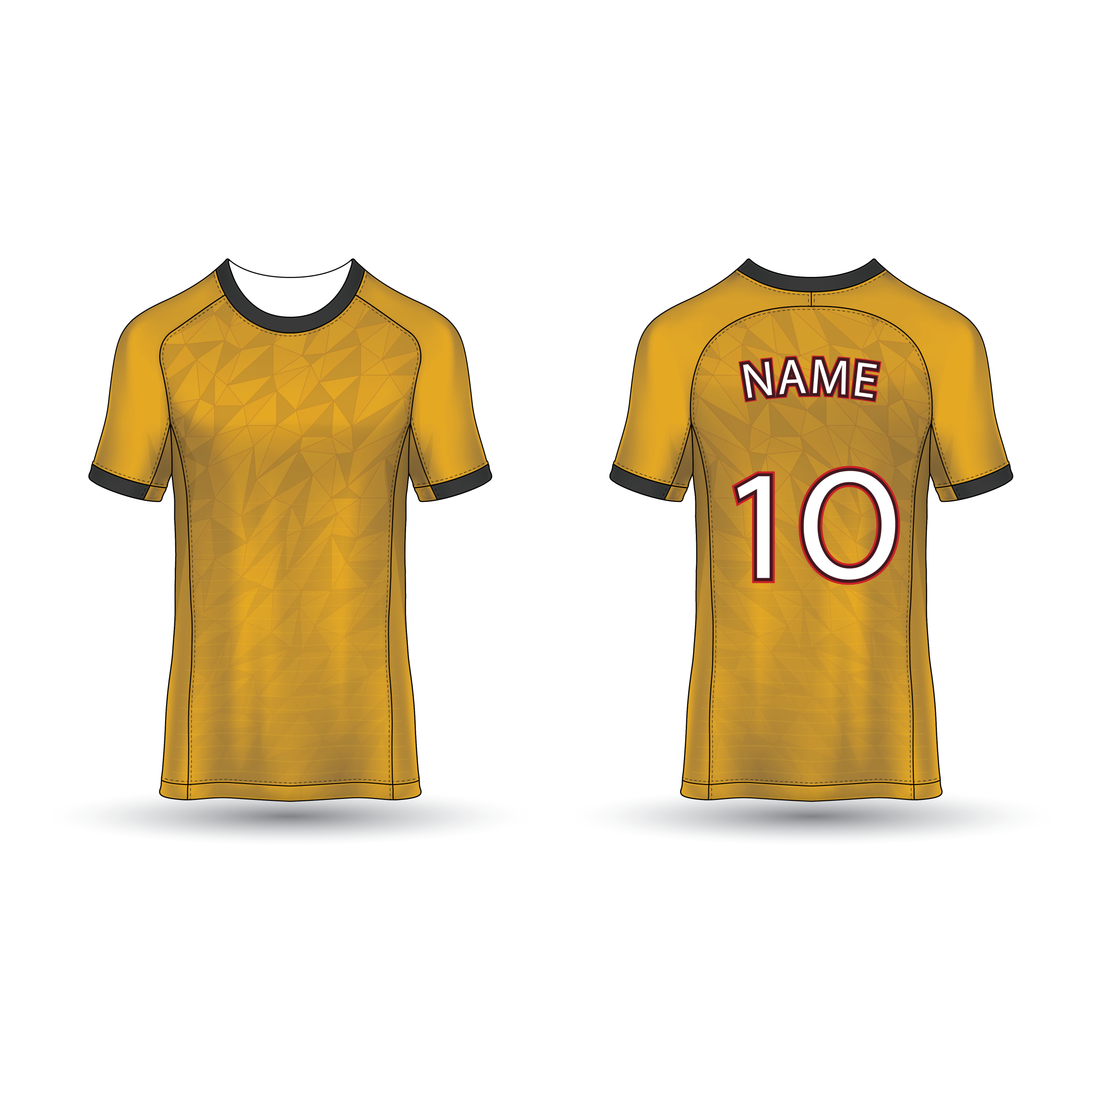 NEXT PRINT All Over Printed Customized Sublimation T-Shirt Unisex Sports Jersey Player Name & Number, Team Name NP50000213